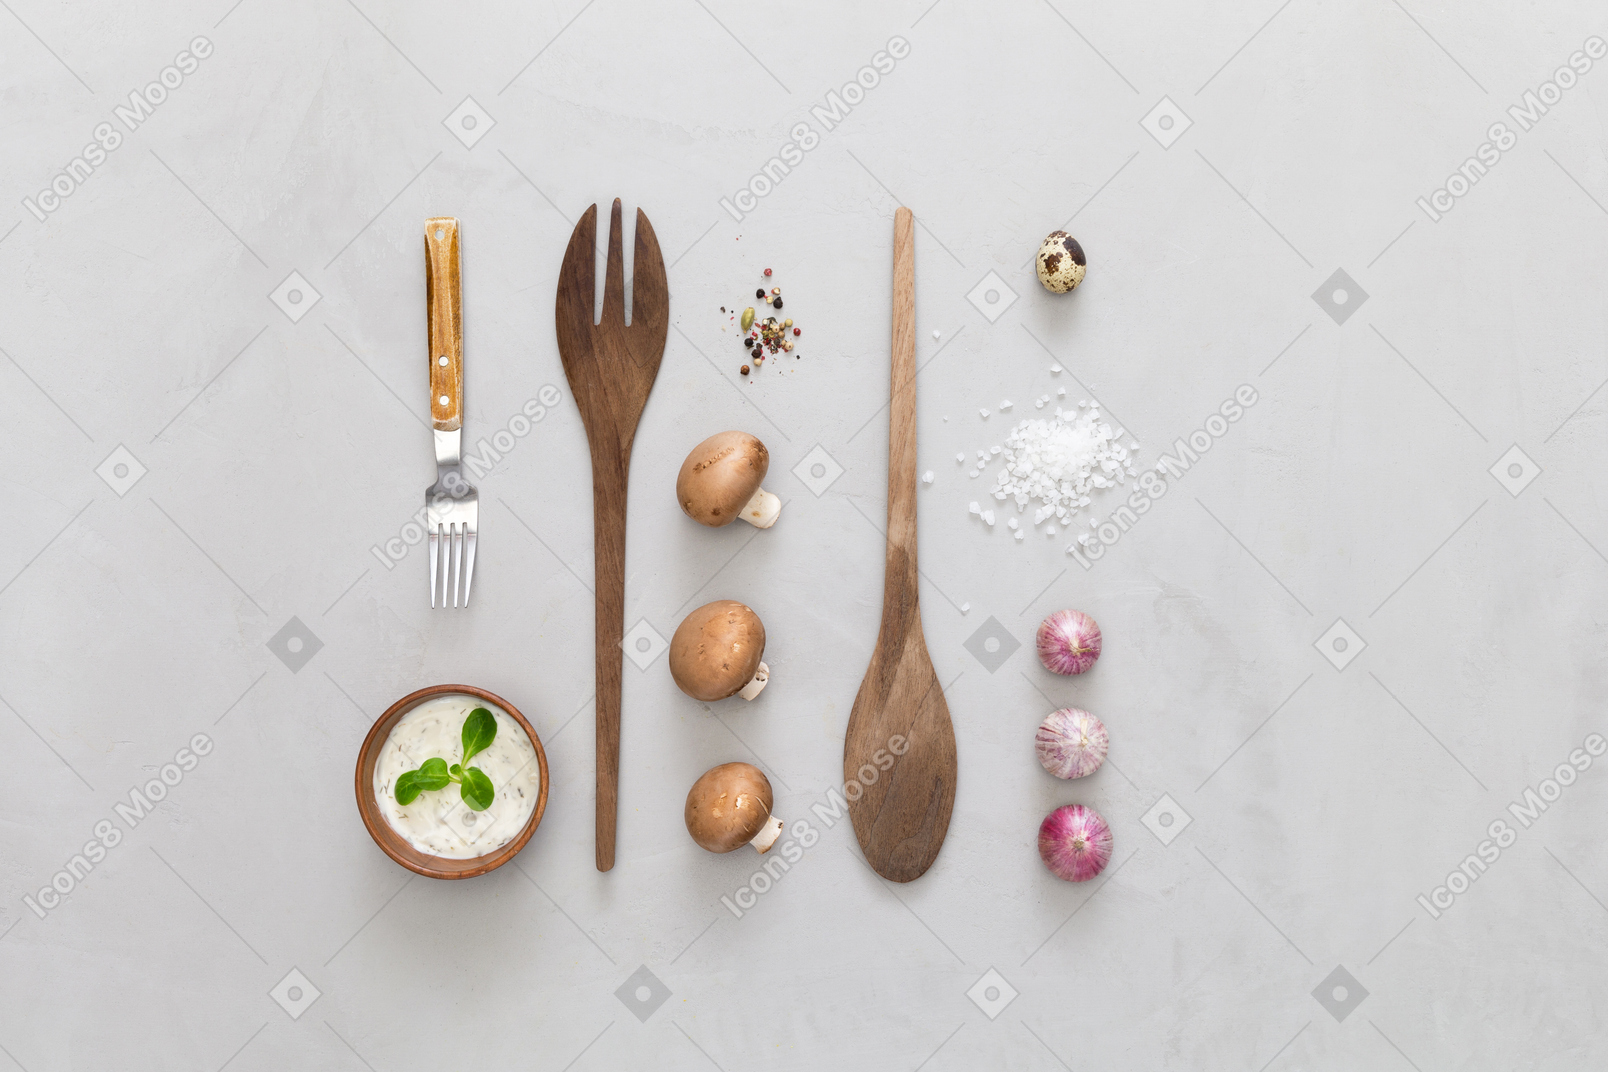 Wooden kitchenware and spices, champignons and spices